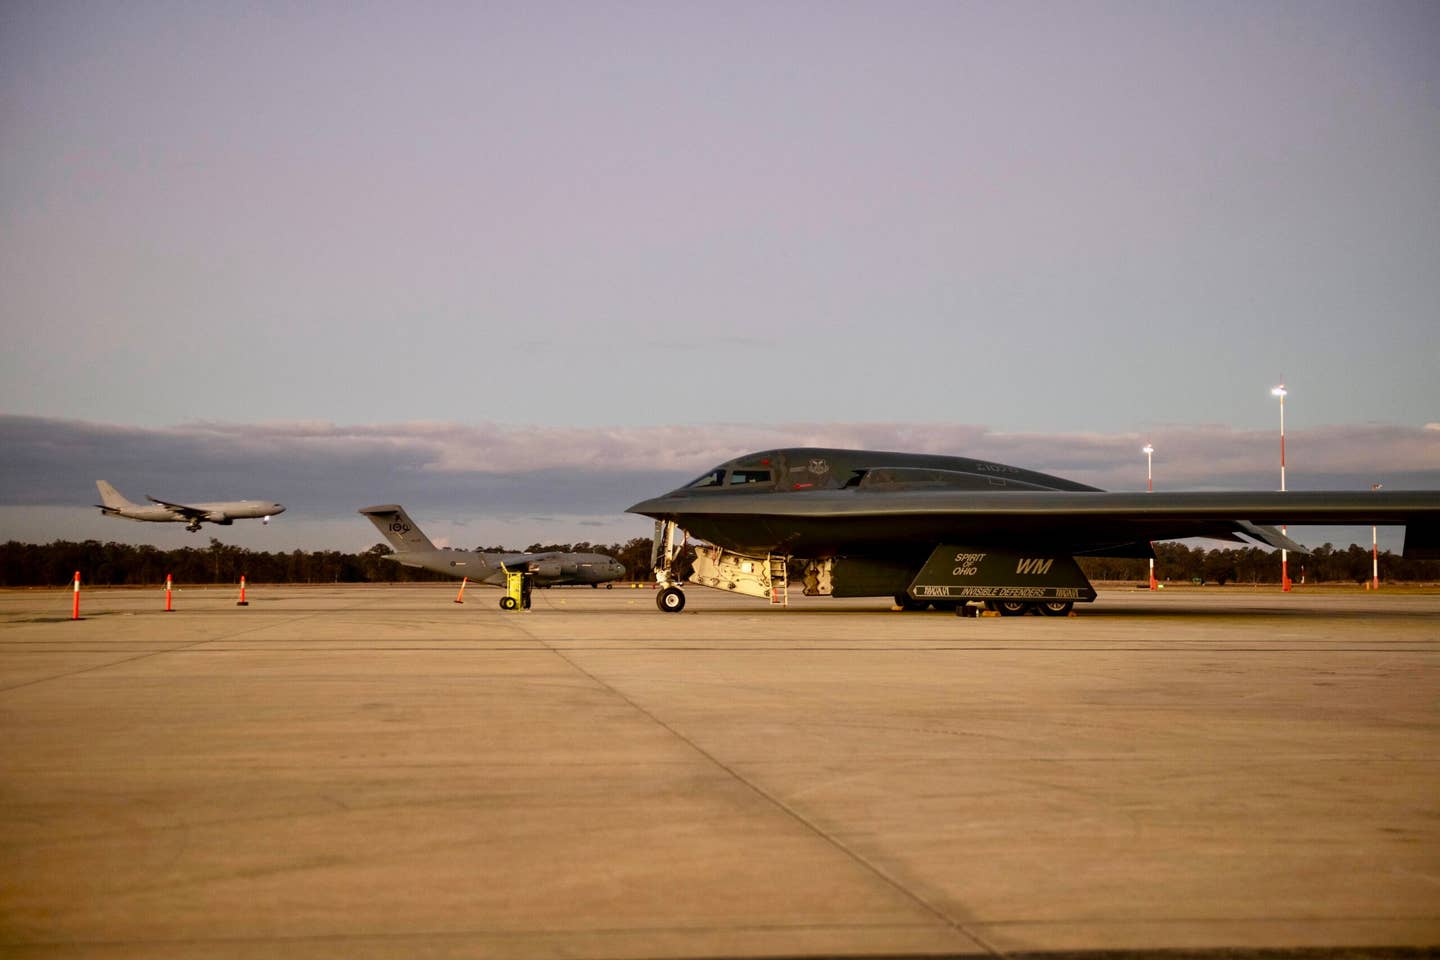 A USAF B-2 Spirit stealth bomber parked on the tarmac at Amberley airbase in Queensland, Australia. <em>USAF photo.</em>